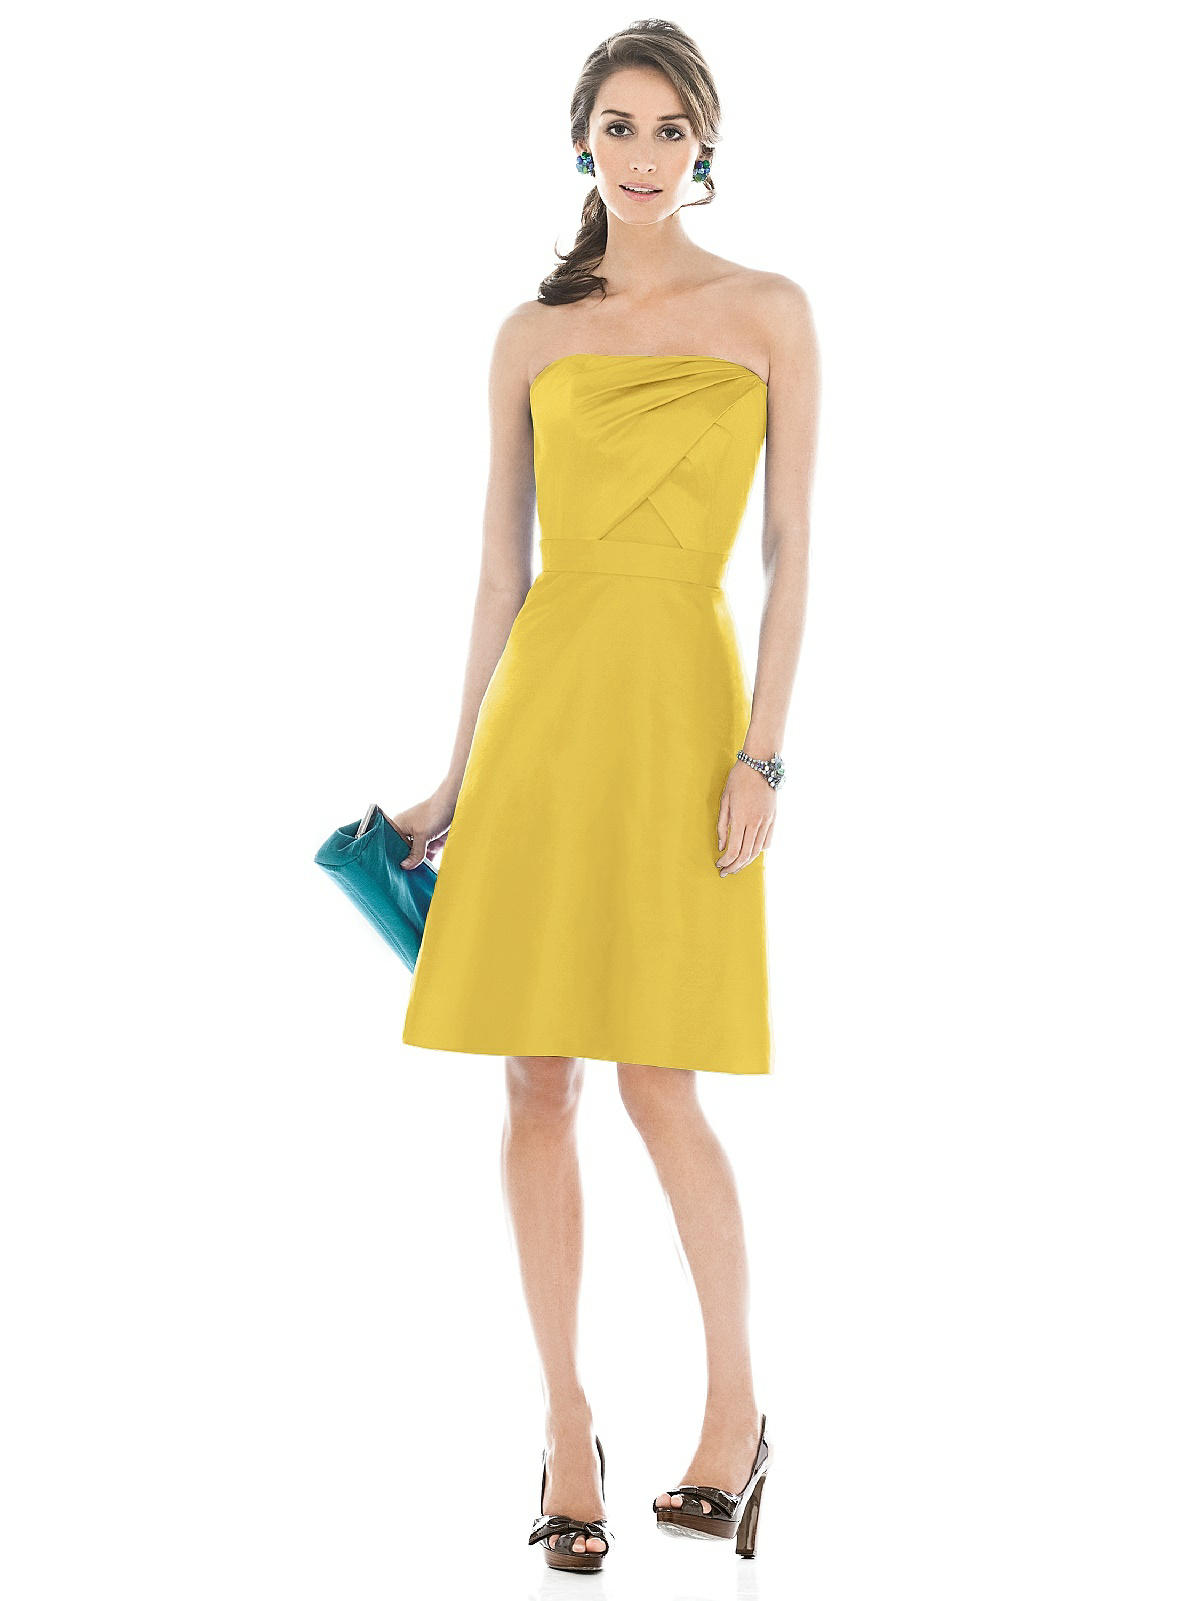 ... canary yellow bridesmaid dresses (click on the image below for more